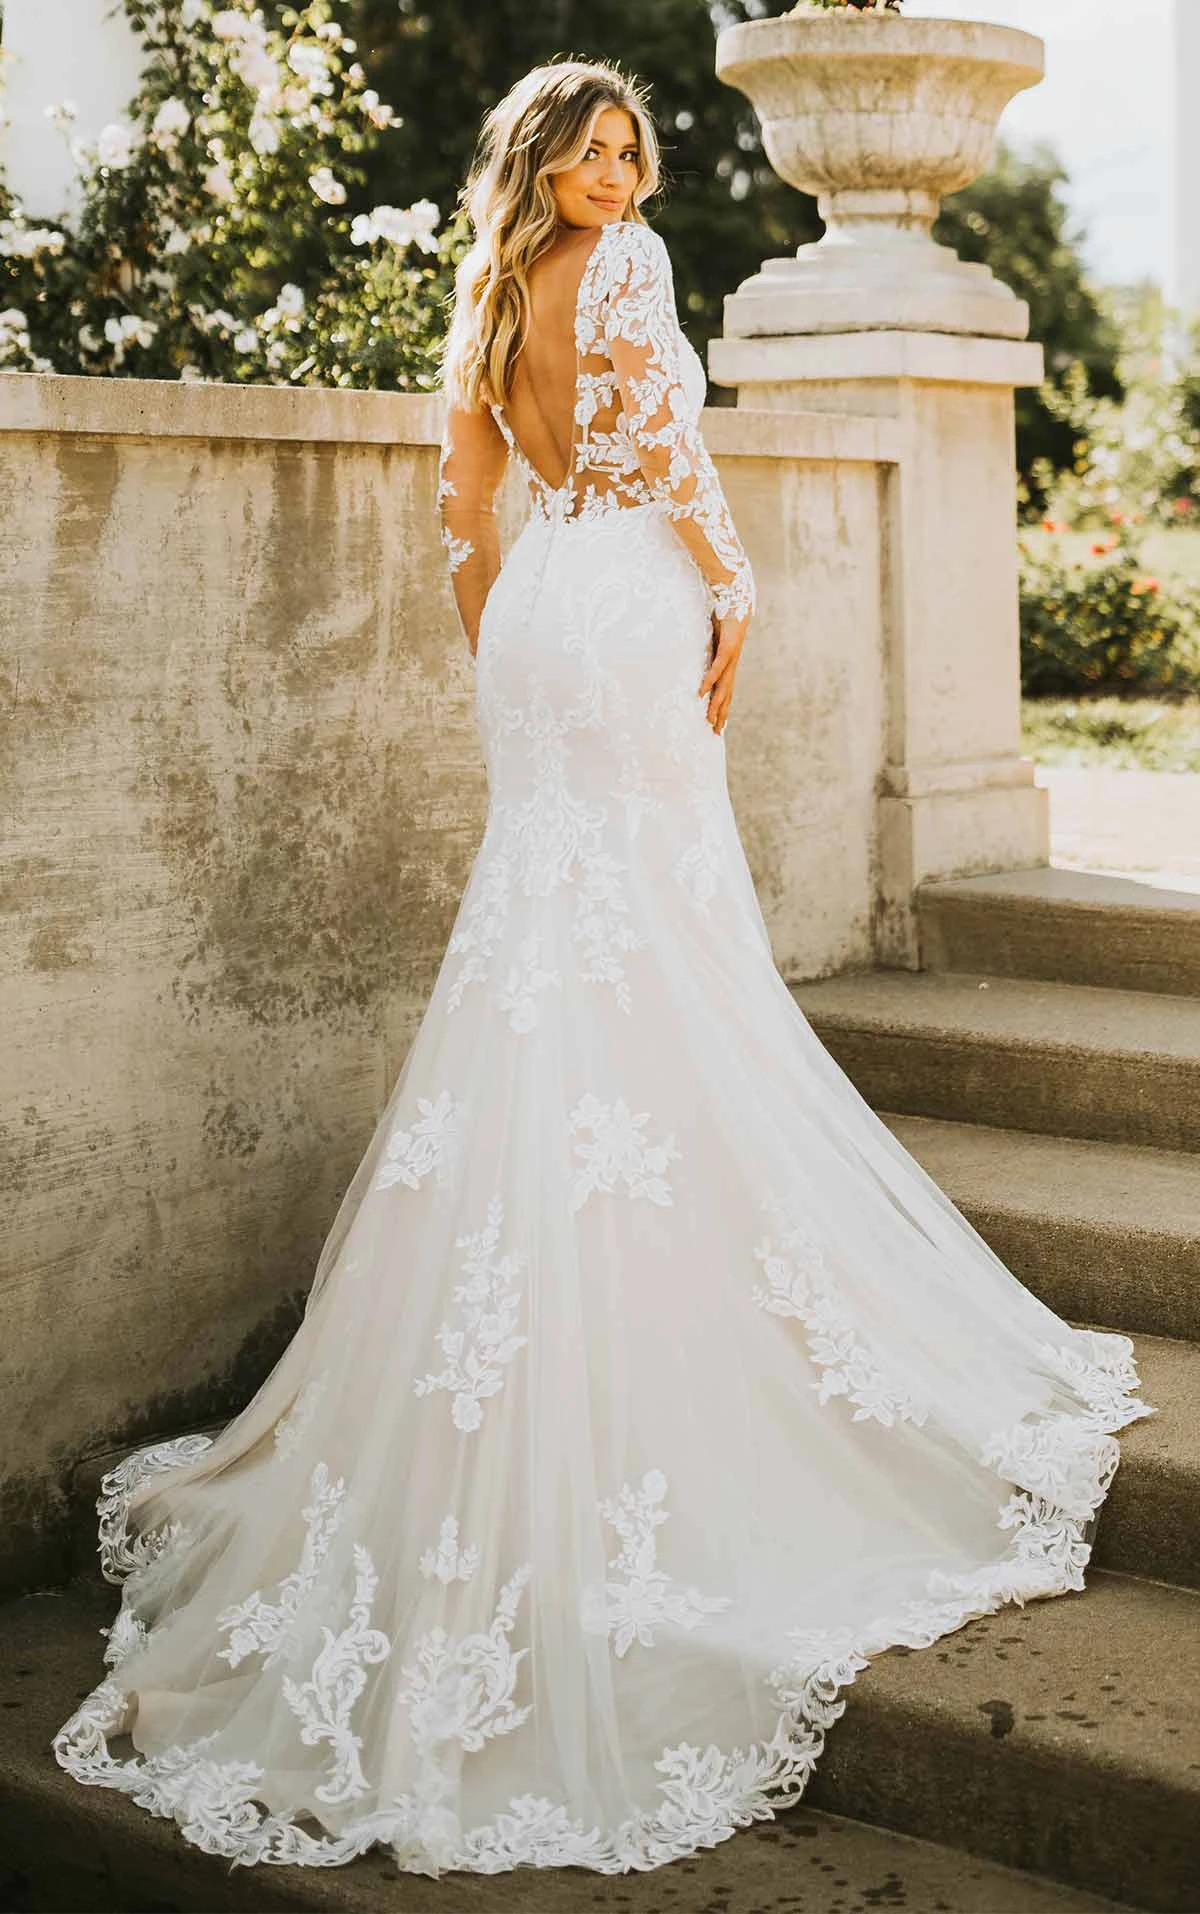 7420 Sexy Long-Sleeve Lace Wedding Dress with Cutouts and Full Train  by Stella York